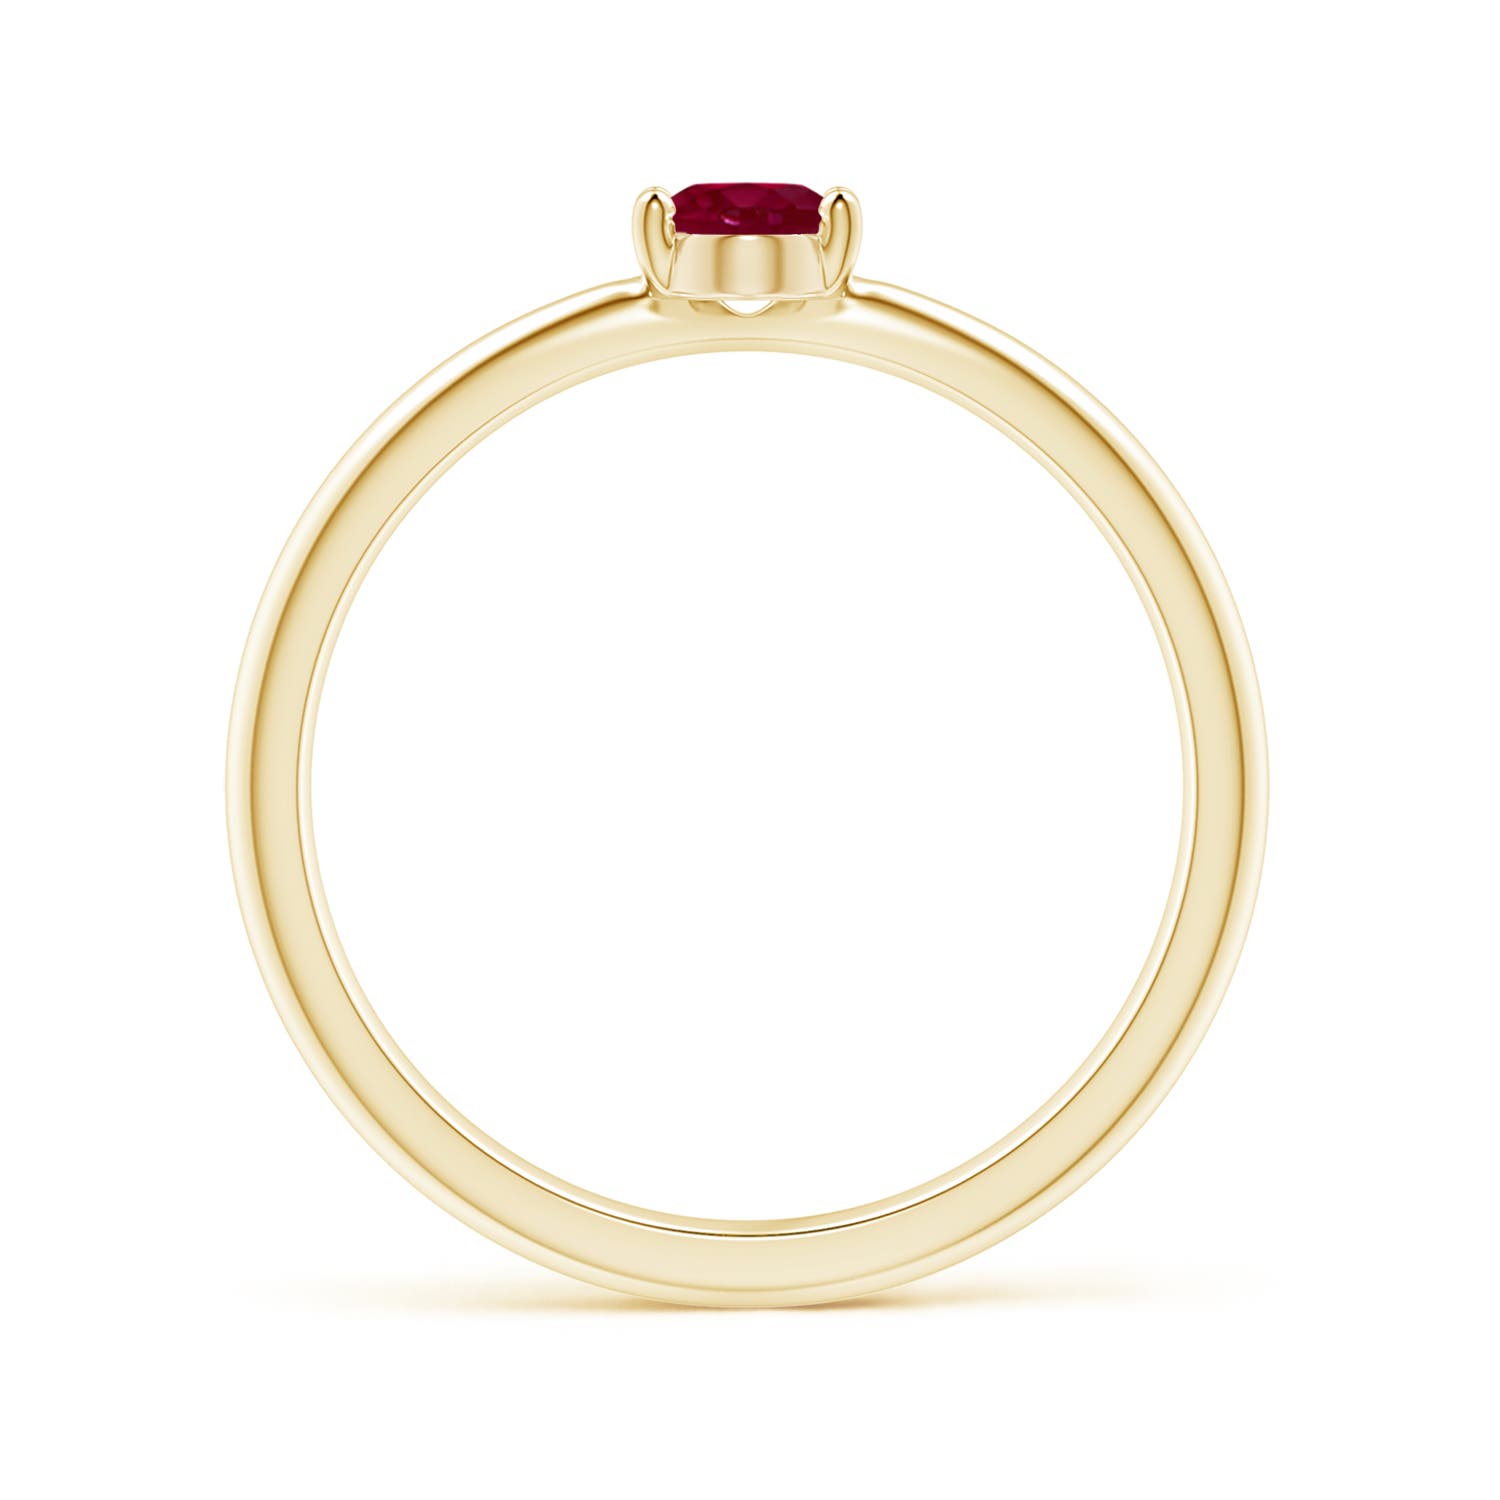 A - Ruby / 0.6 CT / 14 KT Yellow Gold